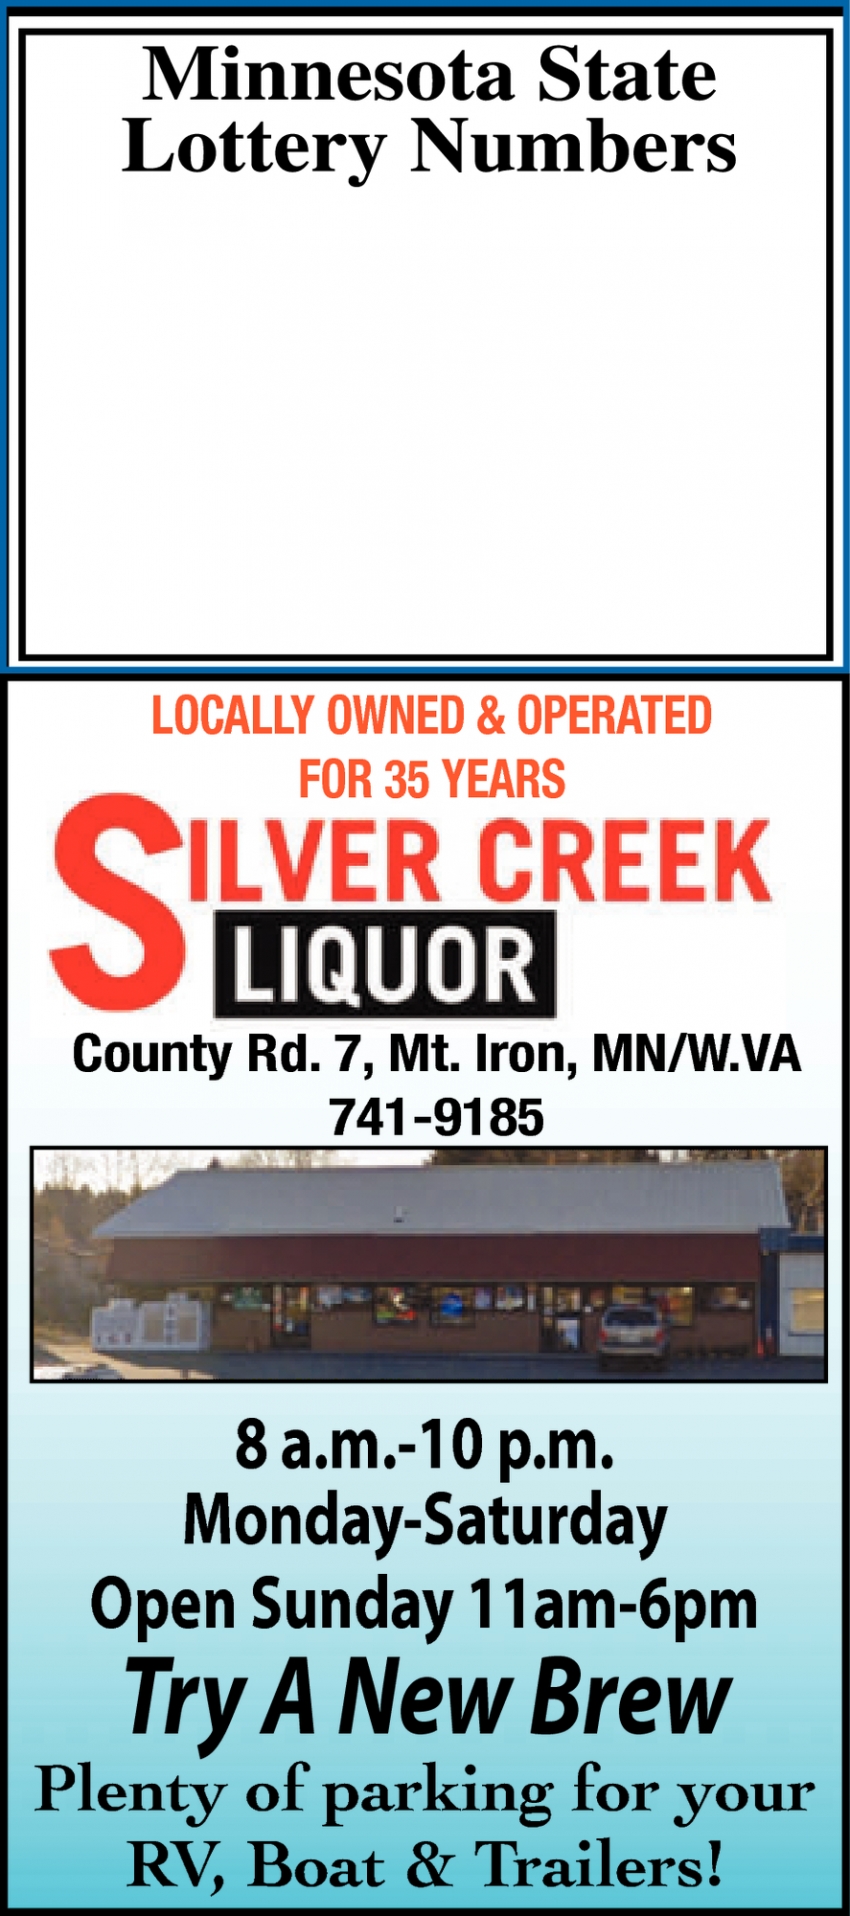 Locally Owned & Operated for 35 Years